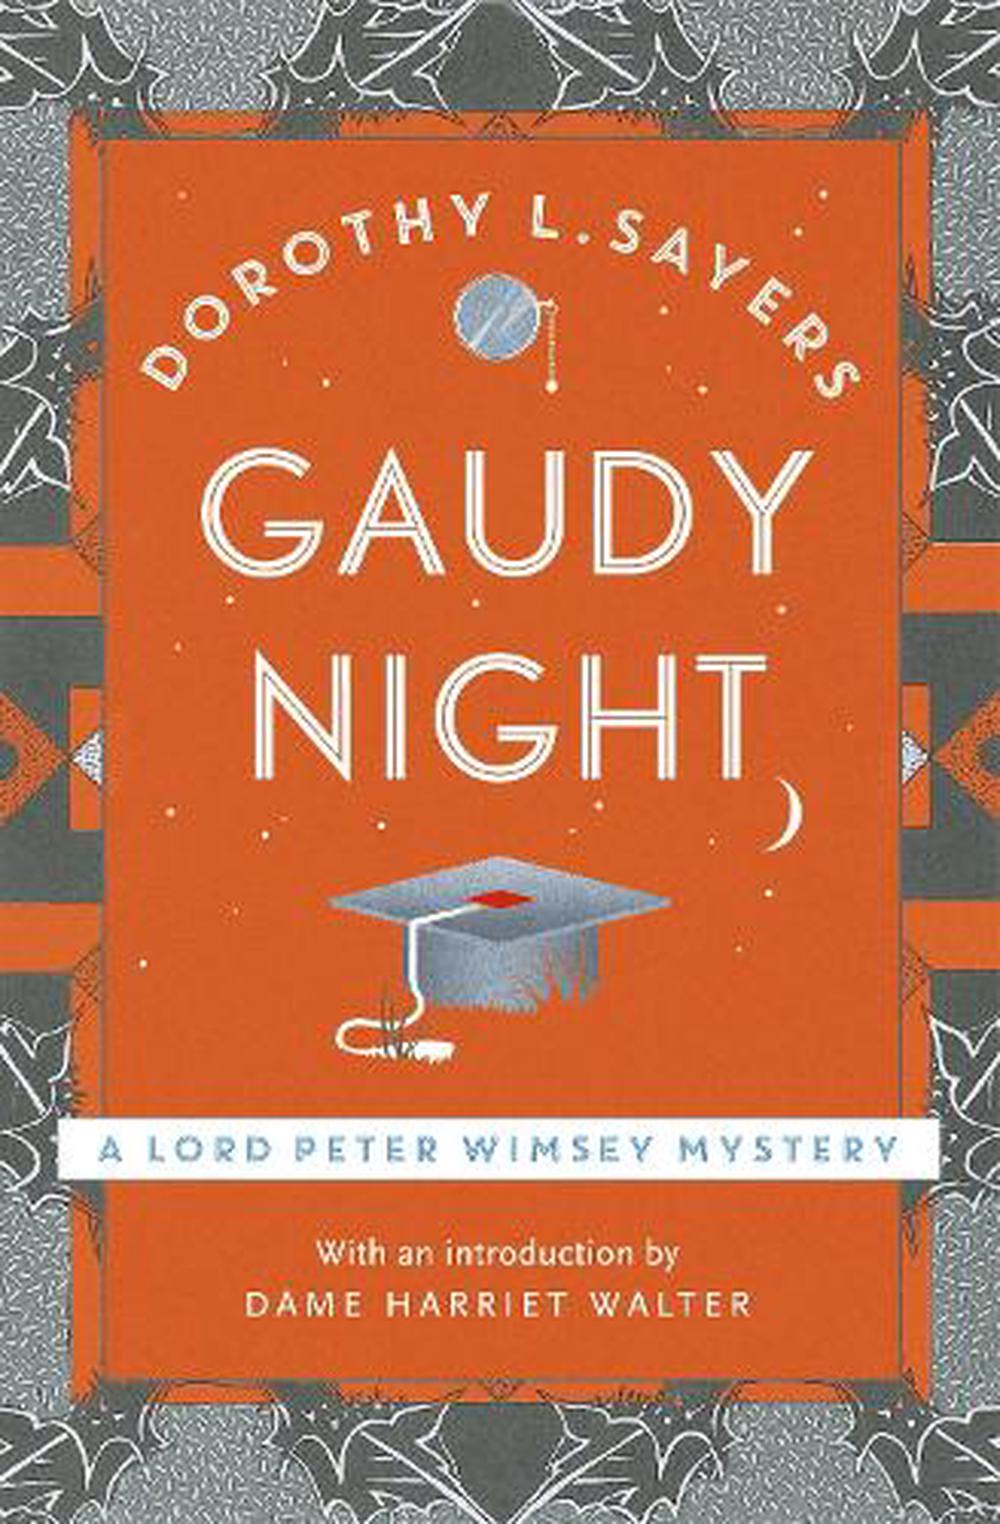 Gaudy Night: Lord Peter Wimsey Book 12 by Dorothy L. Sayers (English